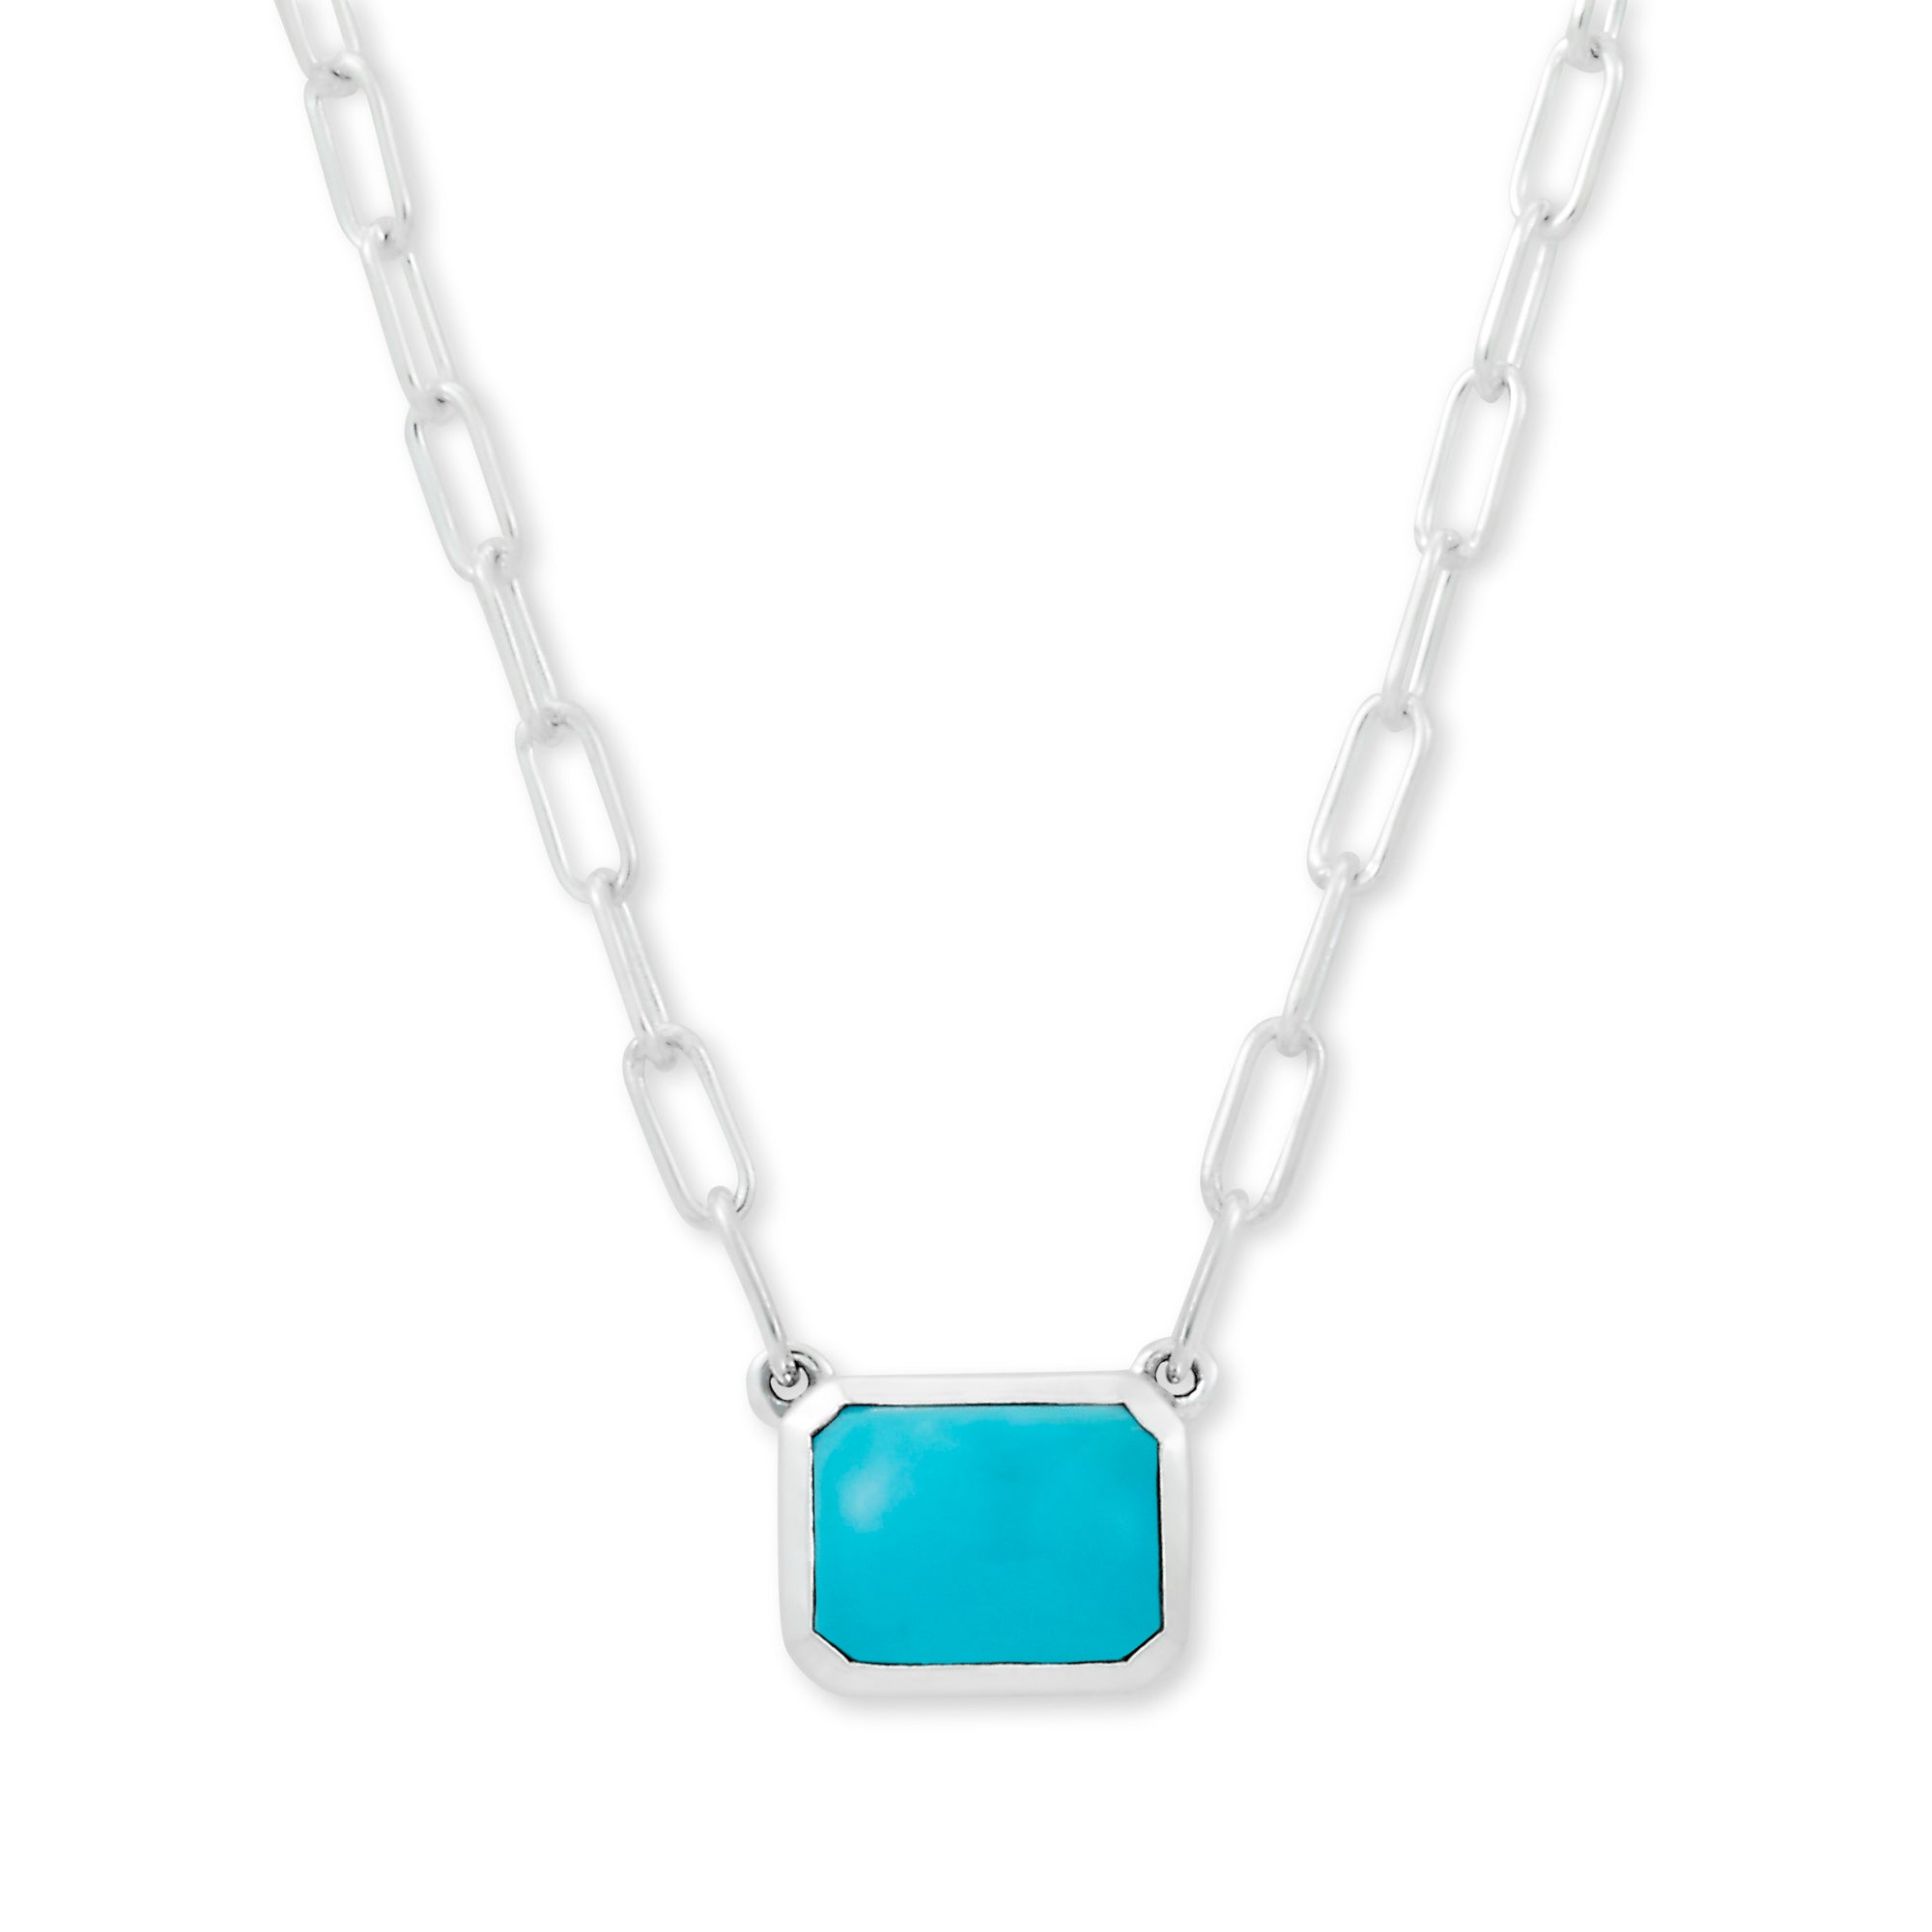 Sleeping Beauty Turquoise Eirini Necklace available at Talisman Collection Fine Jewelers in El Dorado Hills, CA and online. Specs: Sleeping beauty turquoise solitaire necklace features an emerald-cut cabachon turquoise stone measuring 7x9mm and is set in sterling silver.